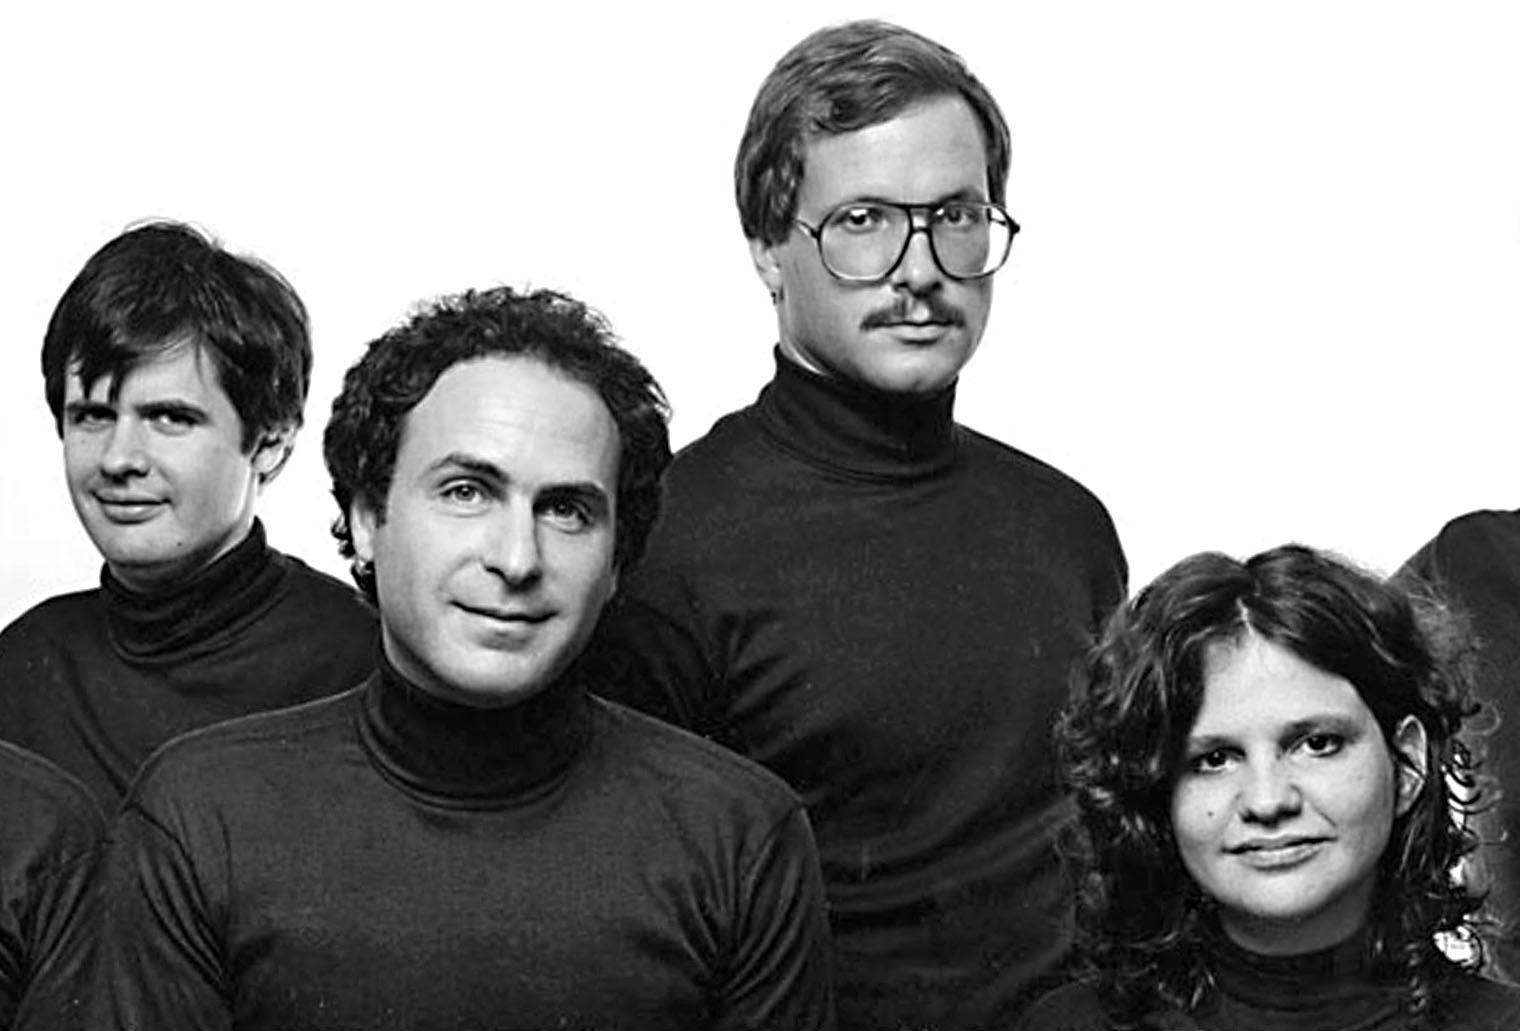  Playwrights Reynolds, Durang, Lapine, Tally, Wasserstein, Finn, and Inaurato - Photograph by Jack Mitchell